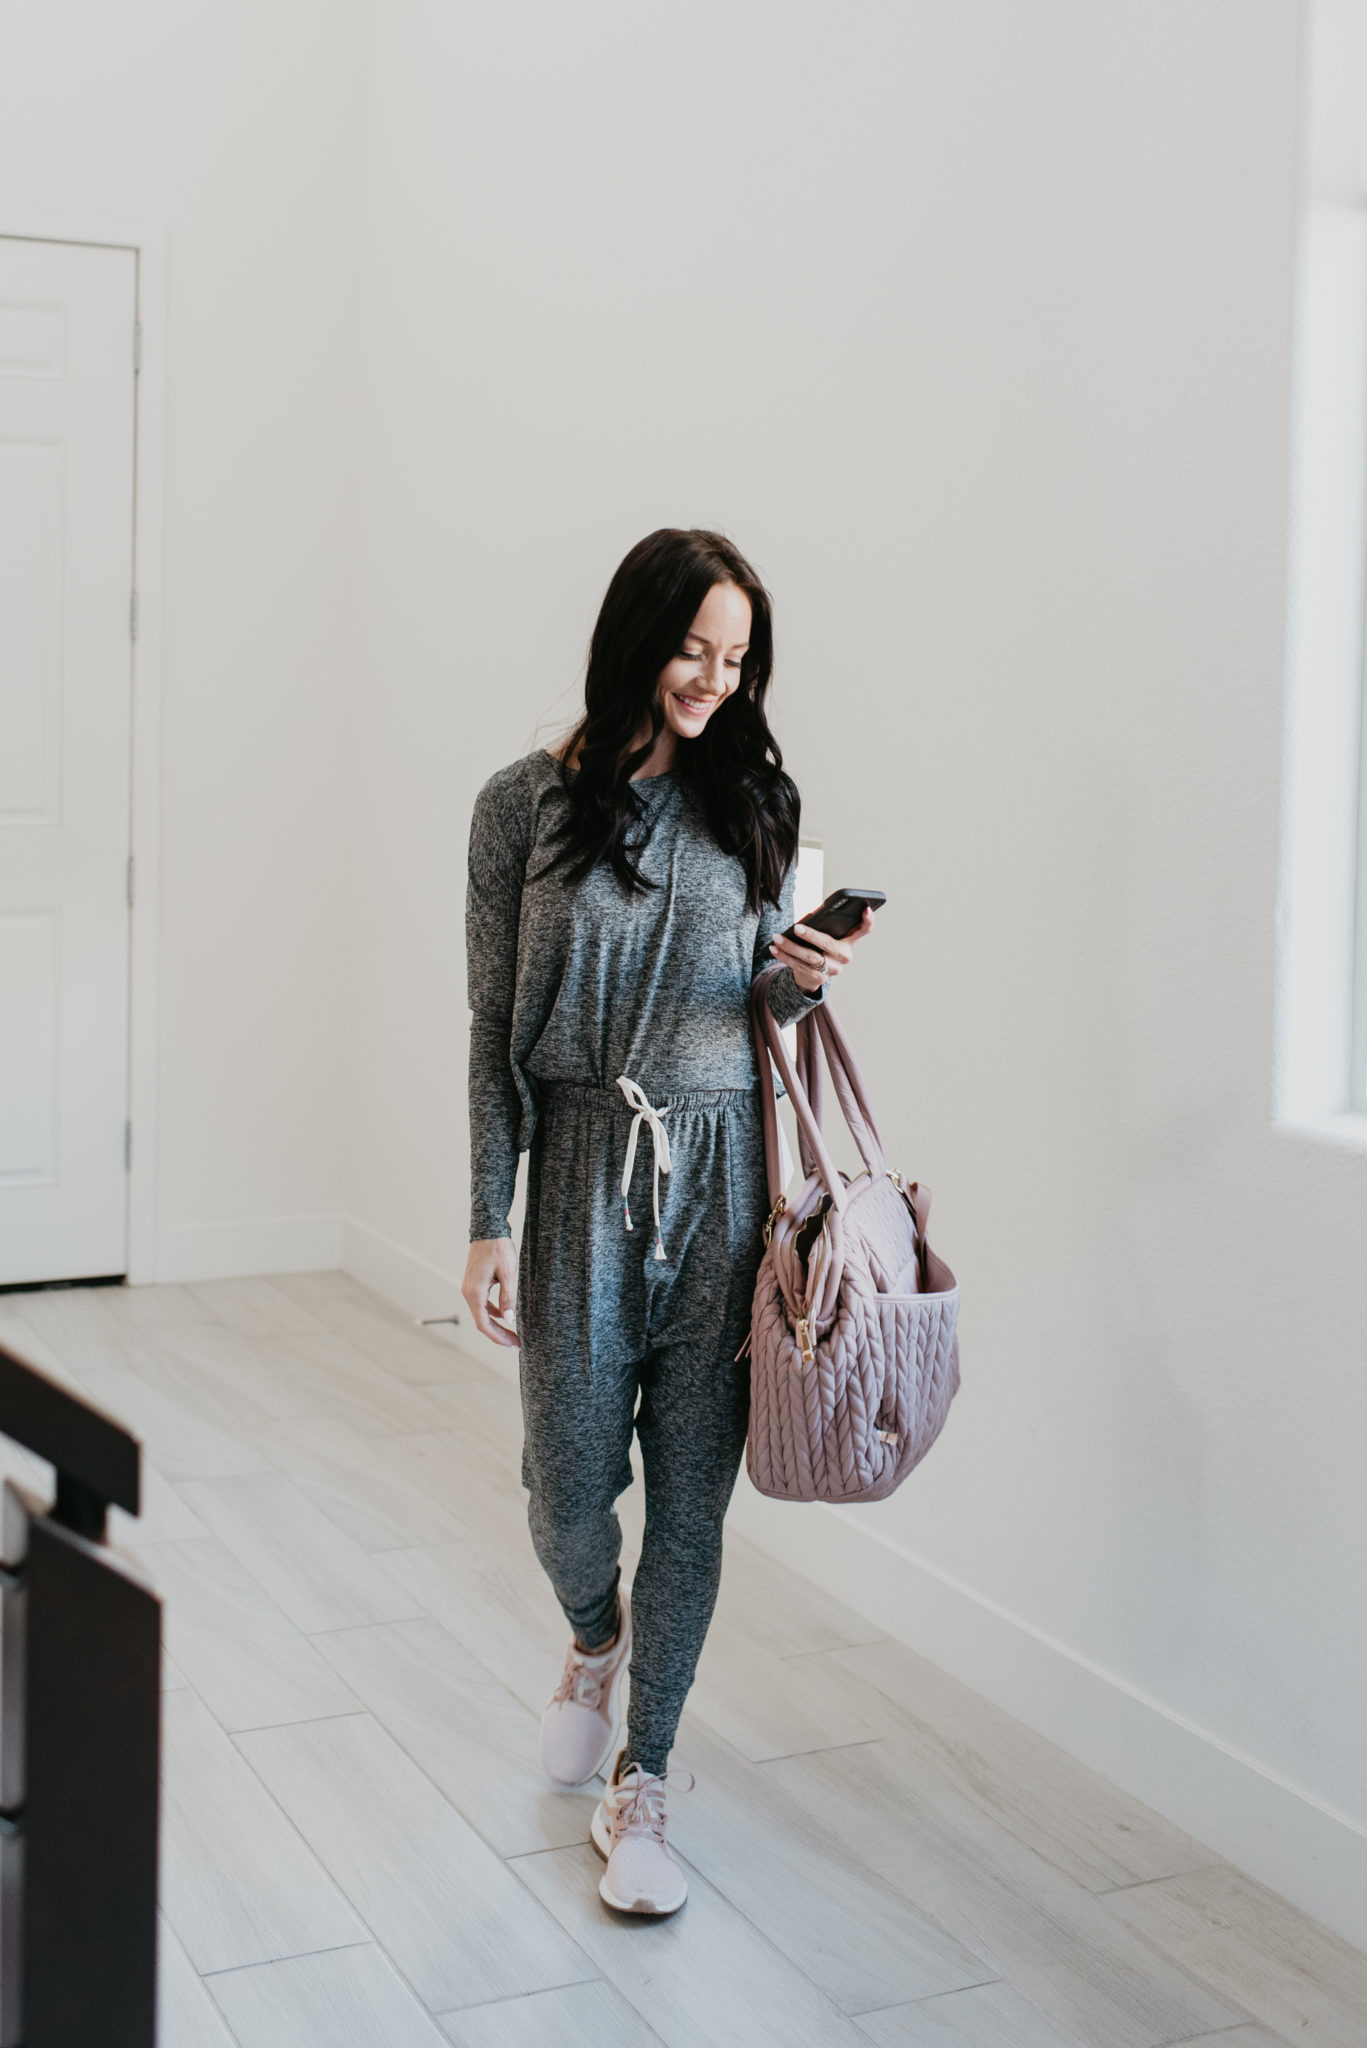 Shopbop Sale favorites featured by top US fashion blog, Outfits & Outings: image of a woman wearing Berkley harem pants available at ShopBop